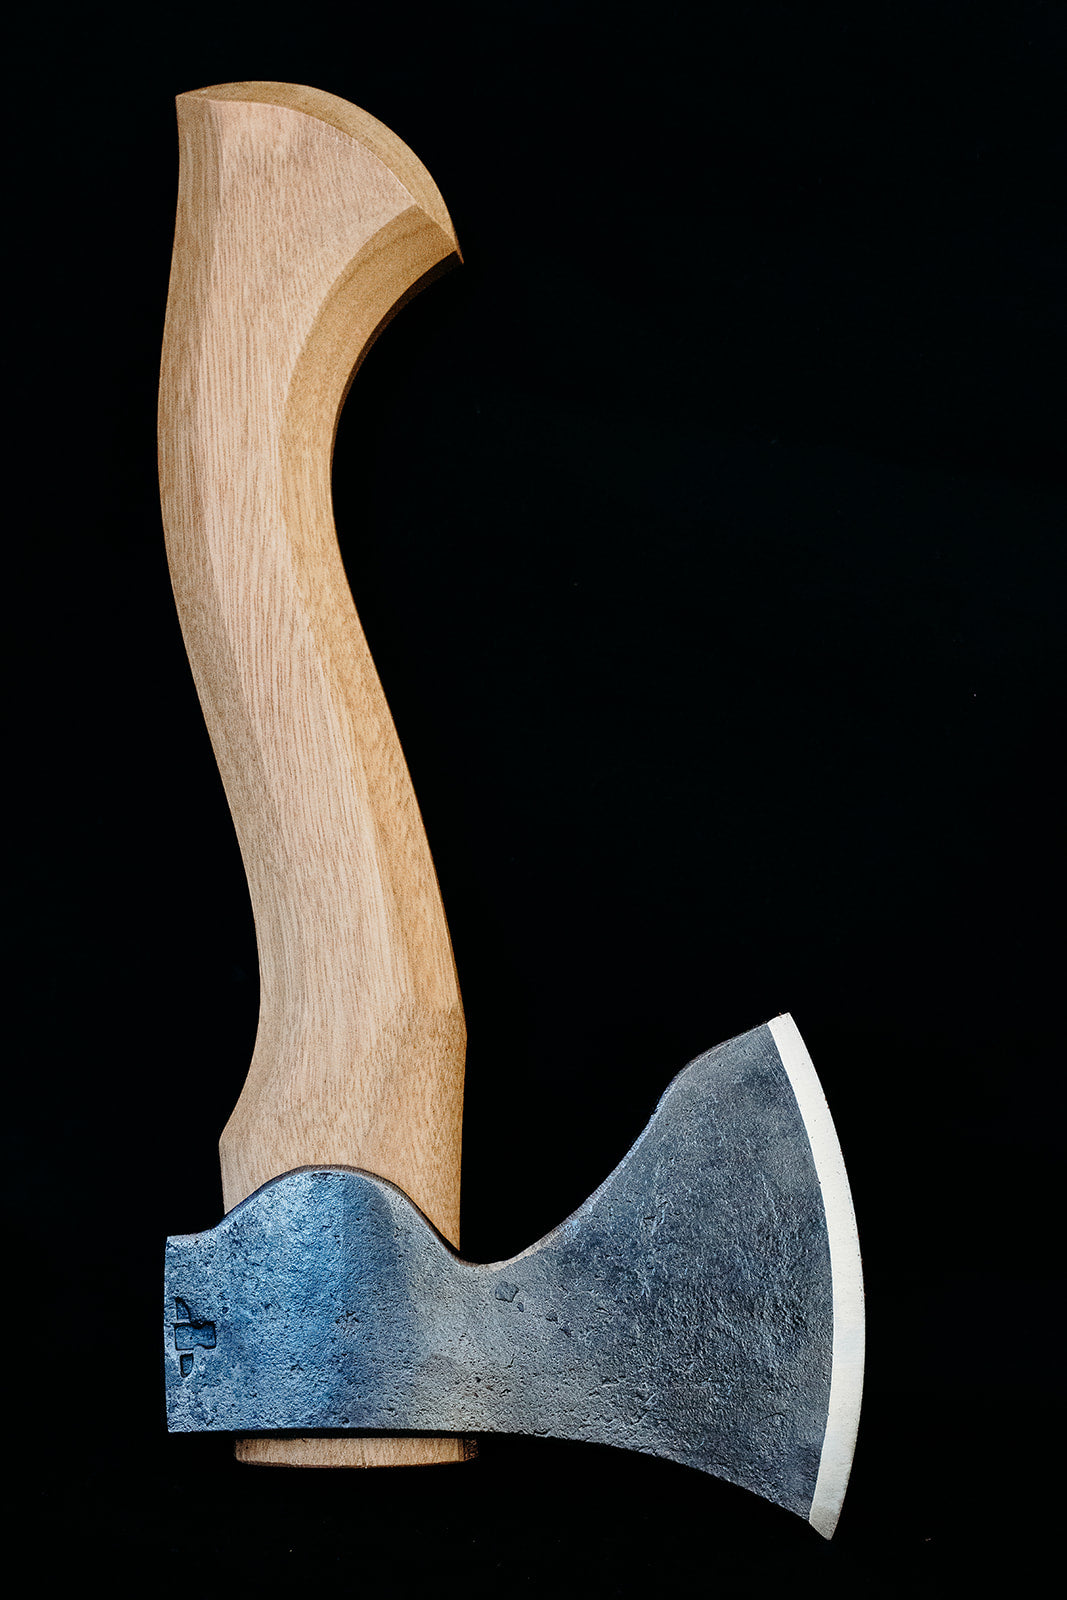 Wood Tamer X The Farmer's Forge 710 Carving Axe - Wood Tamer